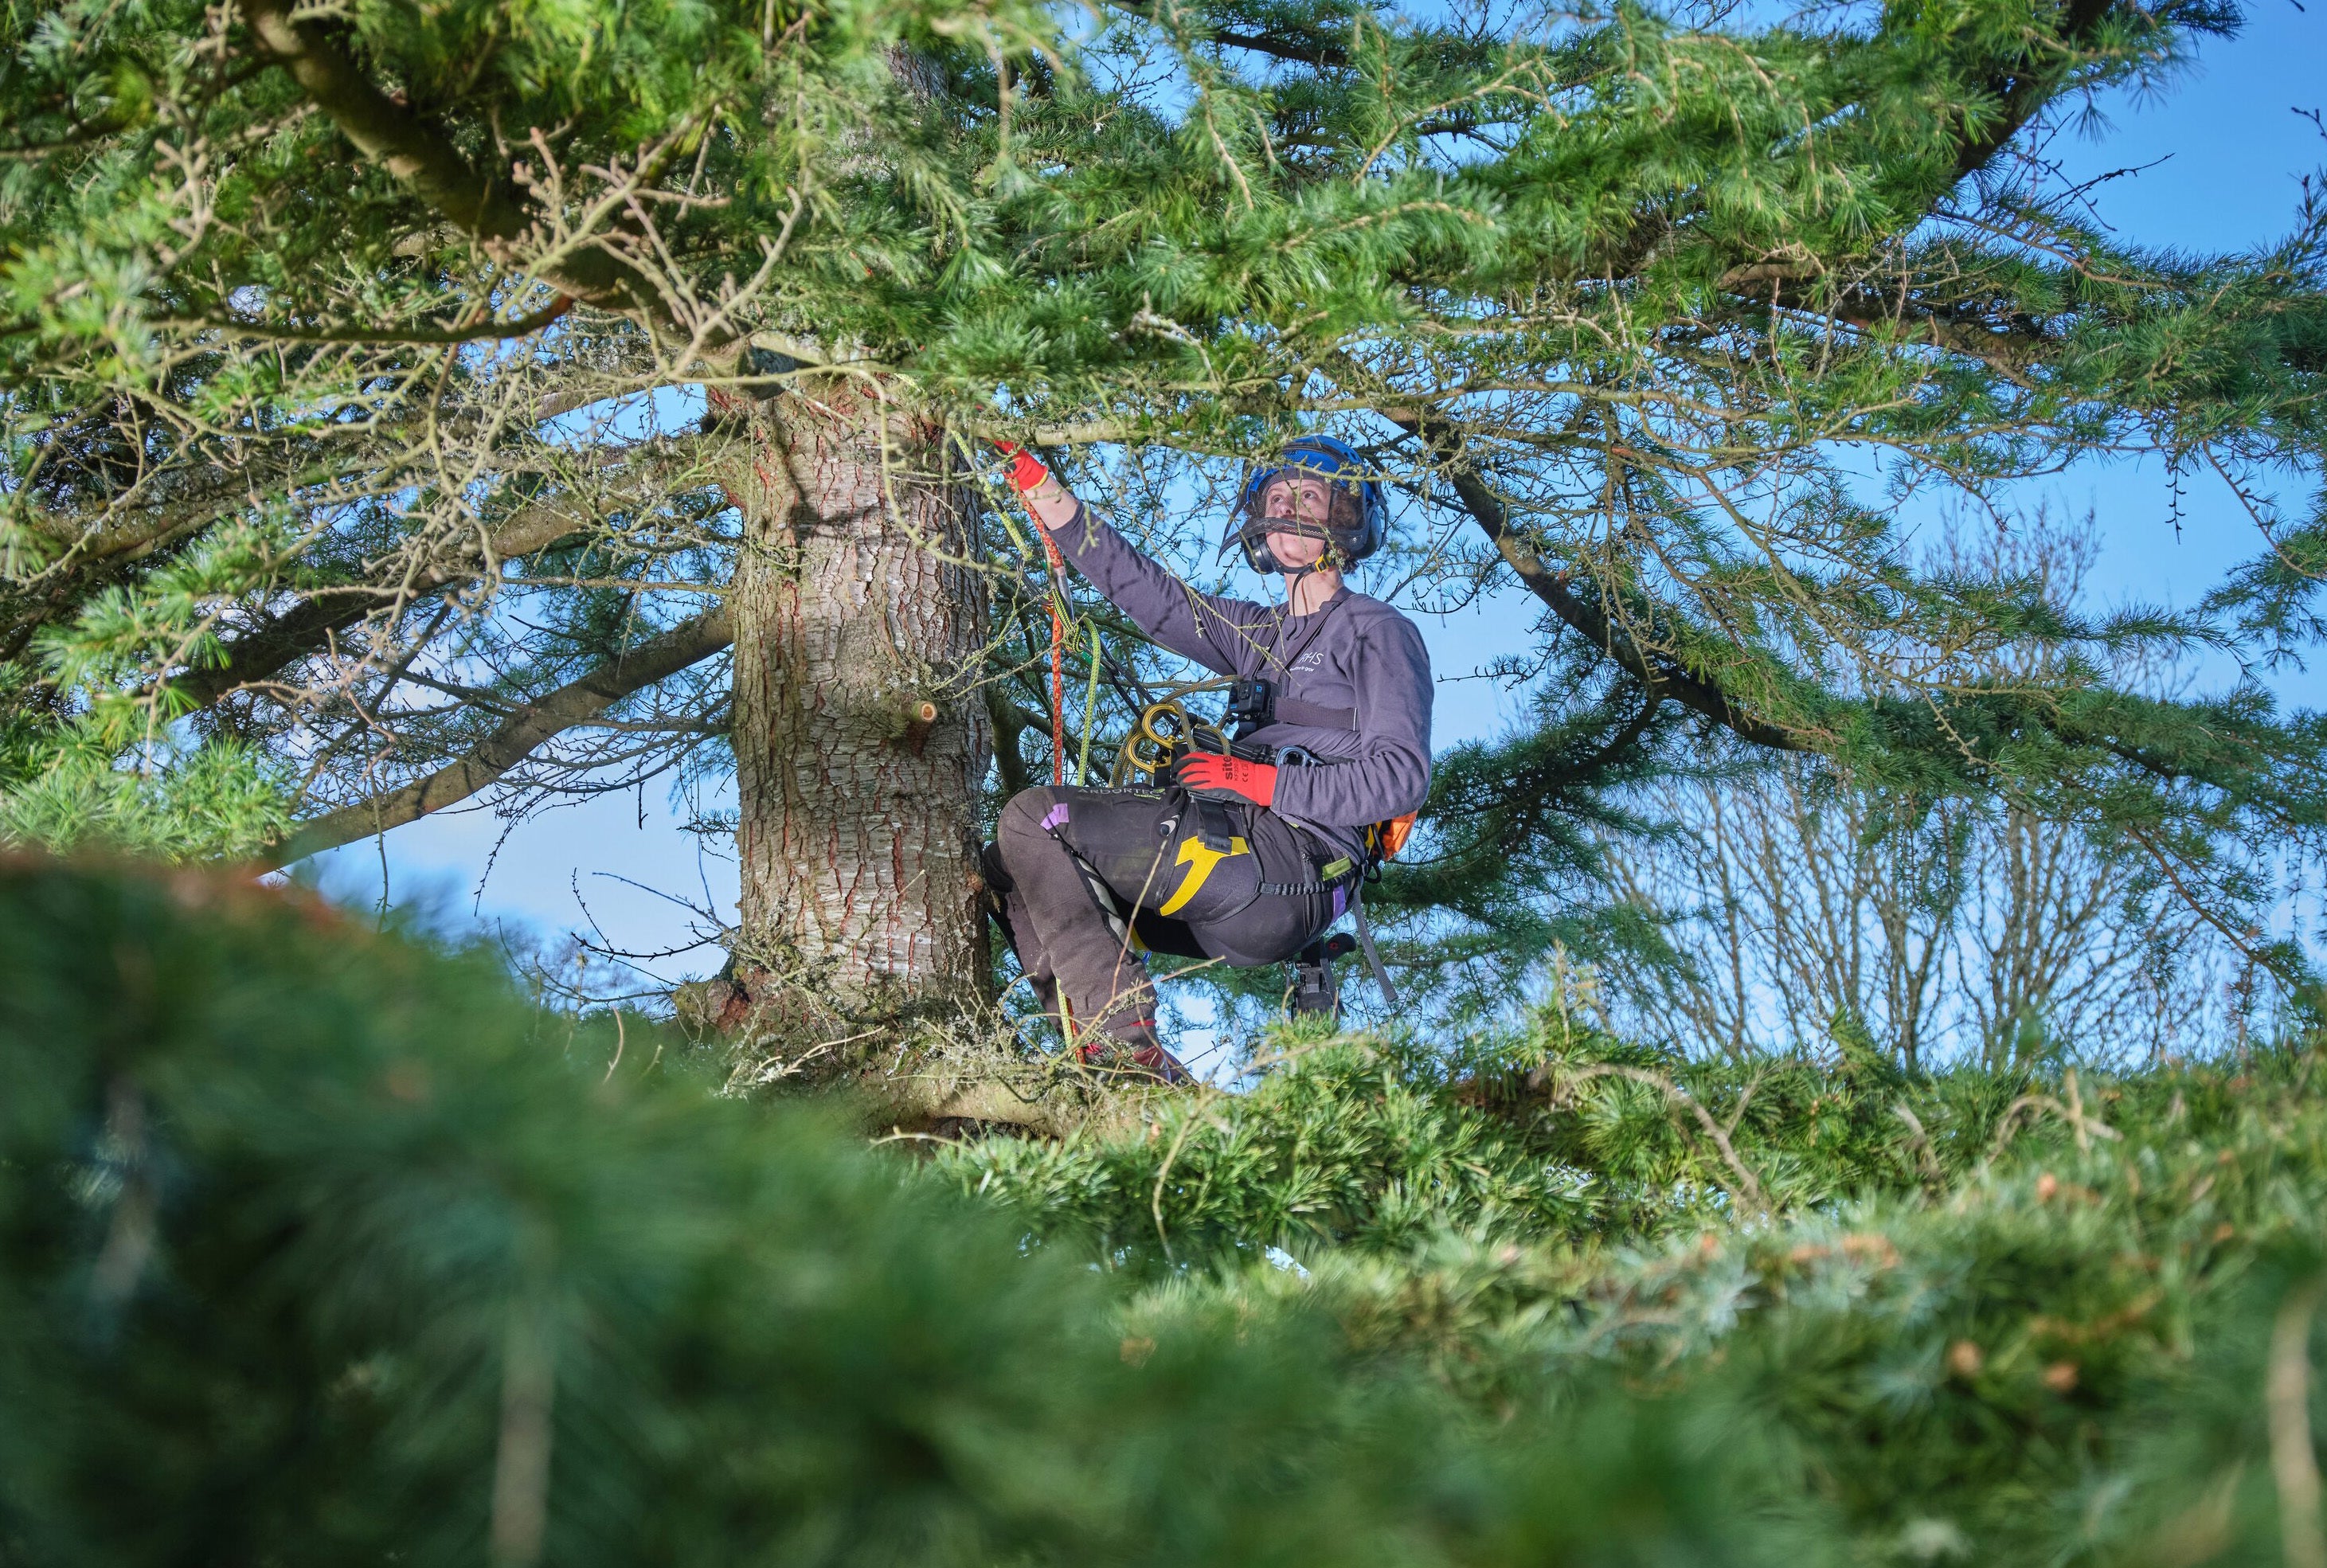 Gabriella Jardine is the Royal Horticultural Society’s second-ever female arborist apprentice (RHS/Guy Harrop/PA)